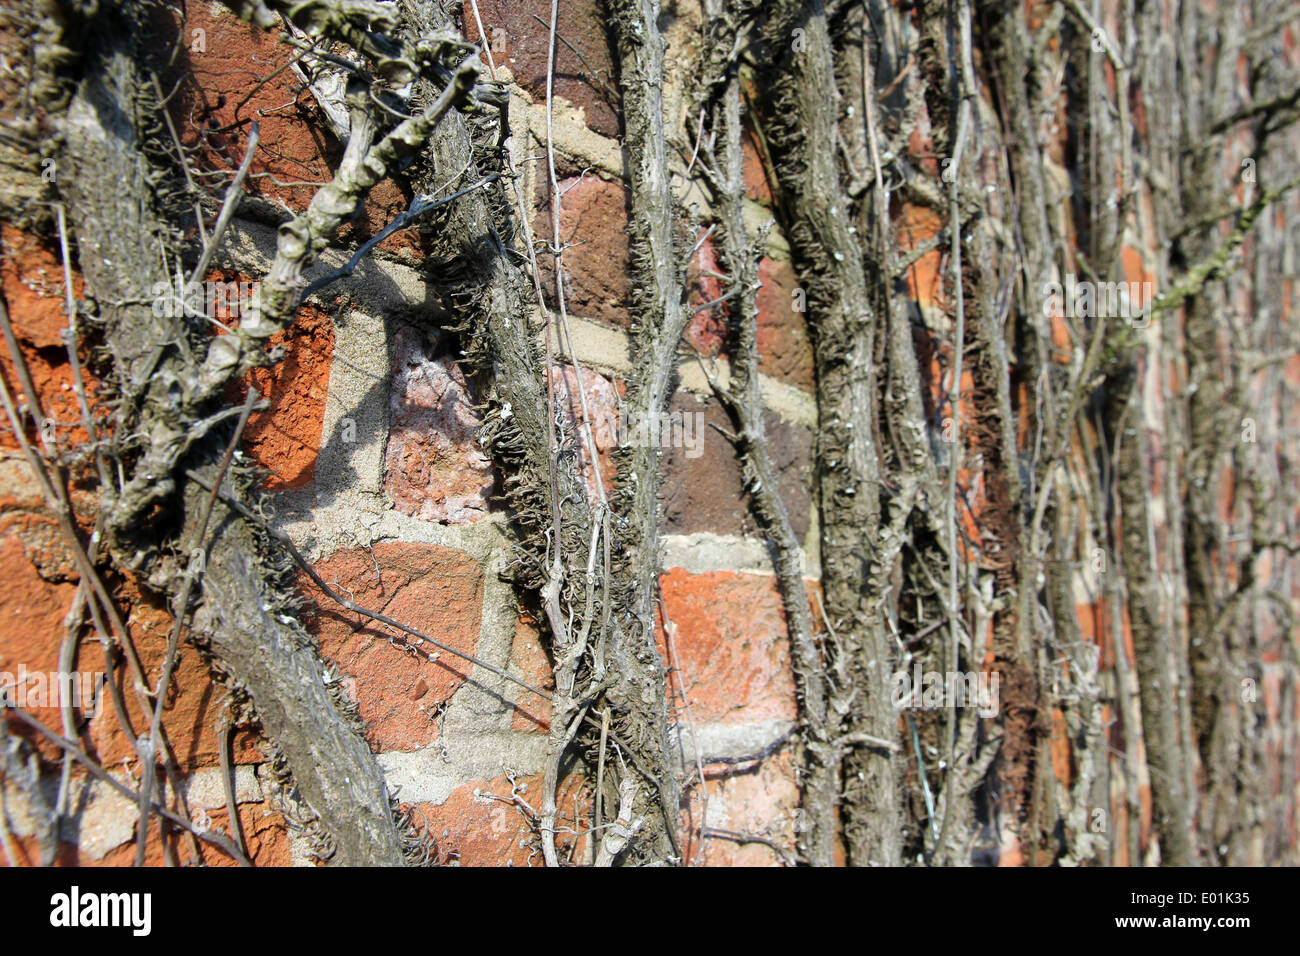 Boston ivy Japanese ivy creeper wall plant on Suffolk red brick wall Stock Photo